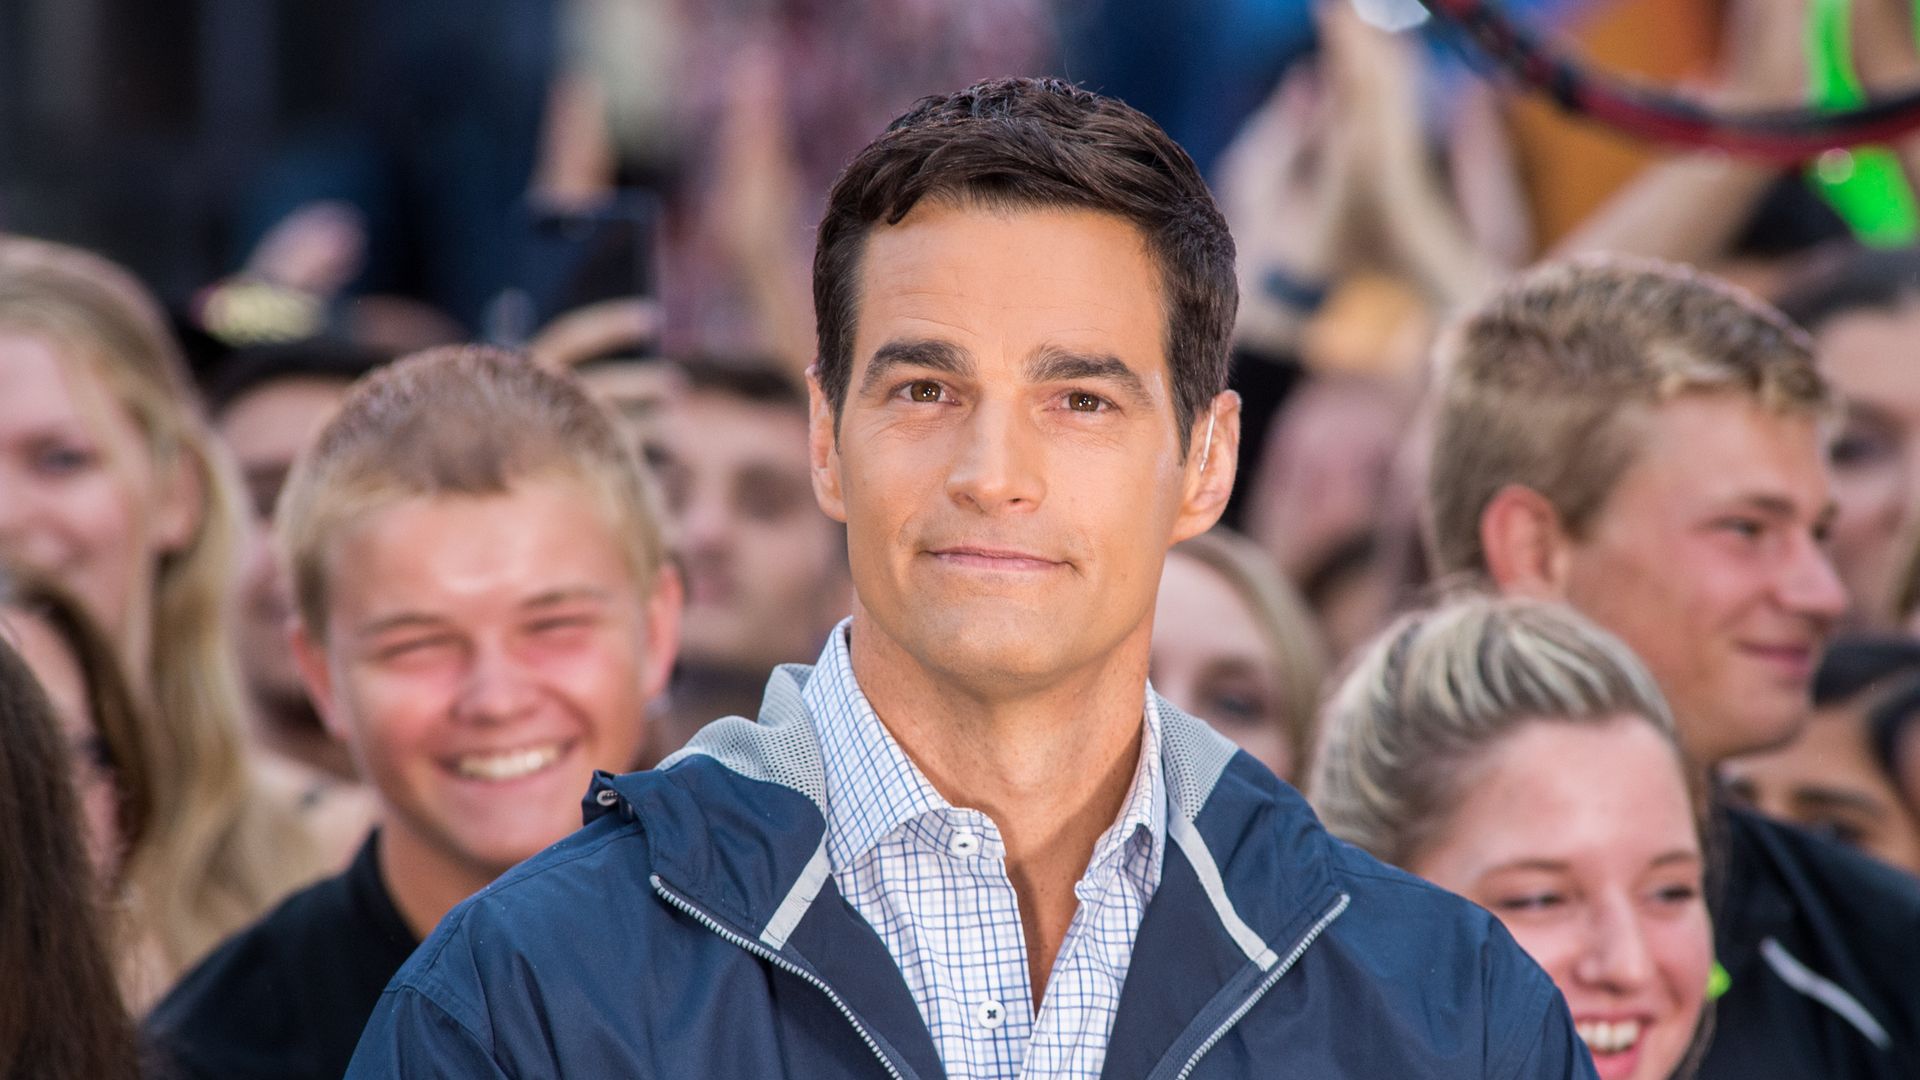 GMA Host Rob Marciano attends performance of Lady Antebellum on ABC's "Good Morning America" at Rumsey Playfield on July 14, 2017 in New York City.